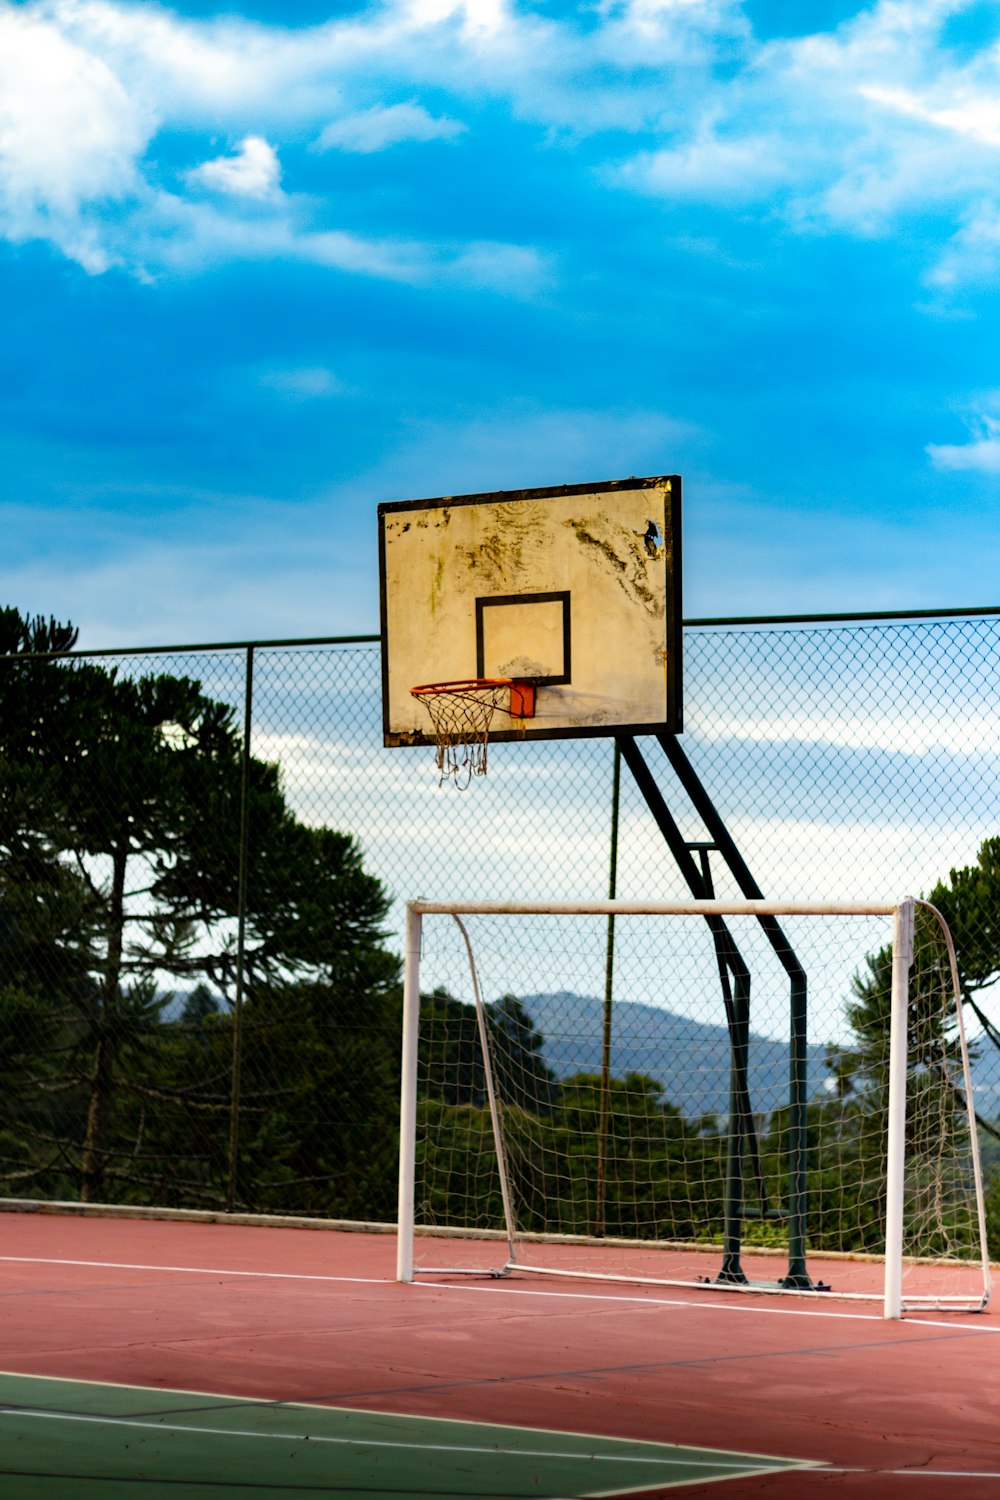 a basketball court with a basketball going through the net